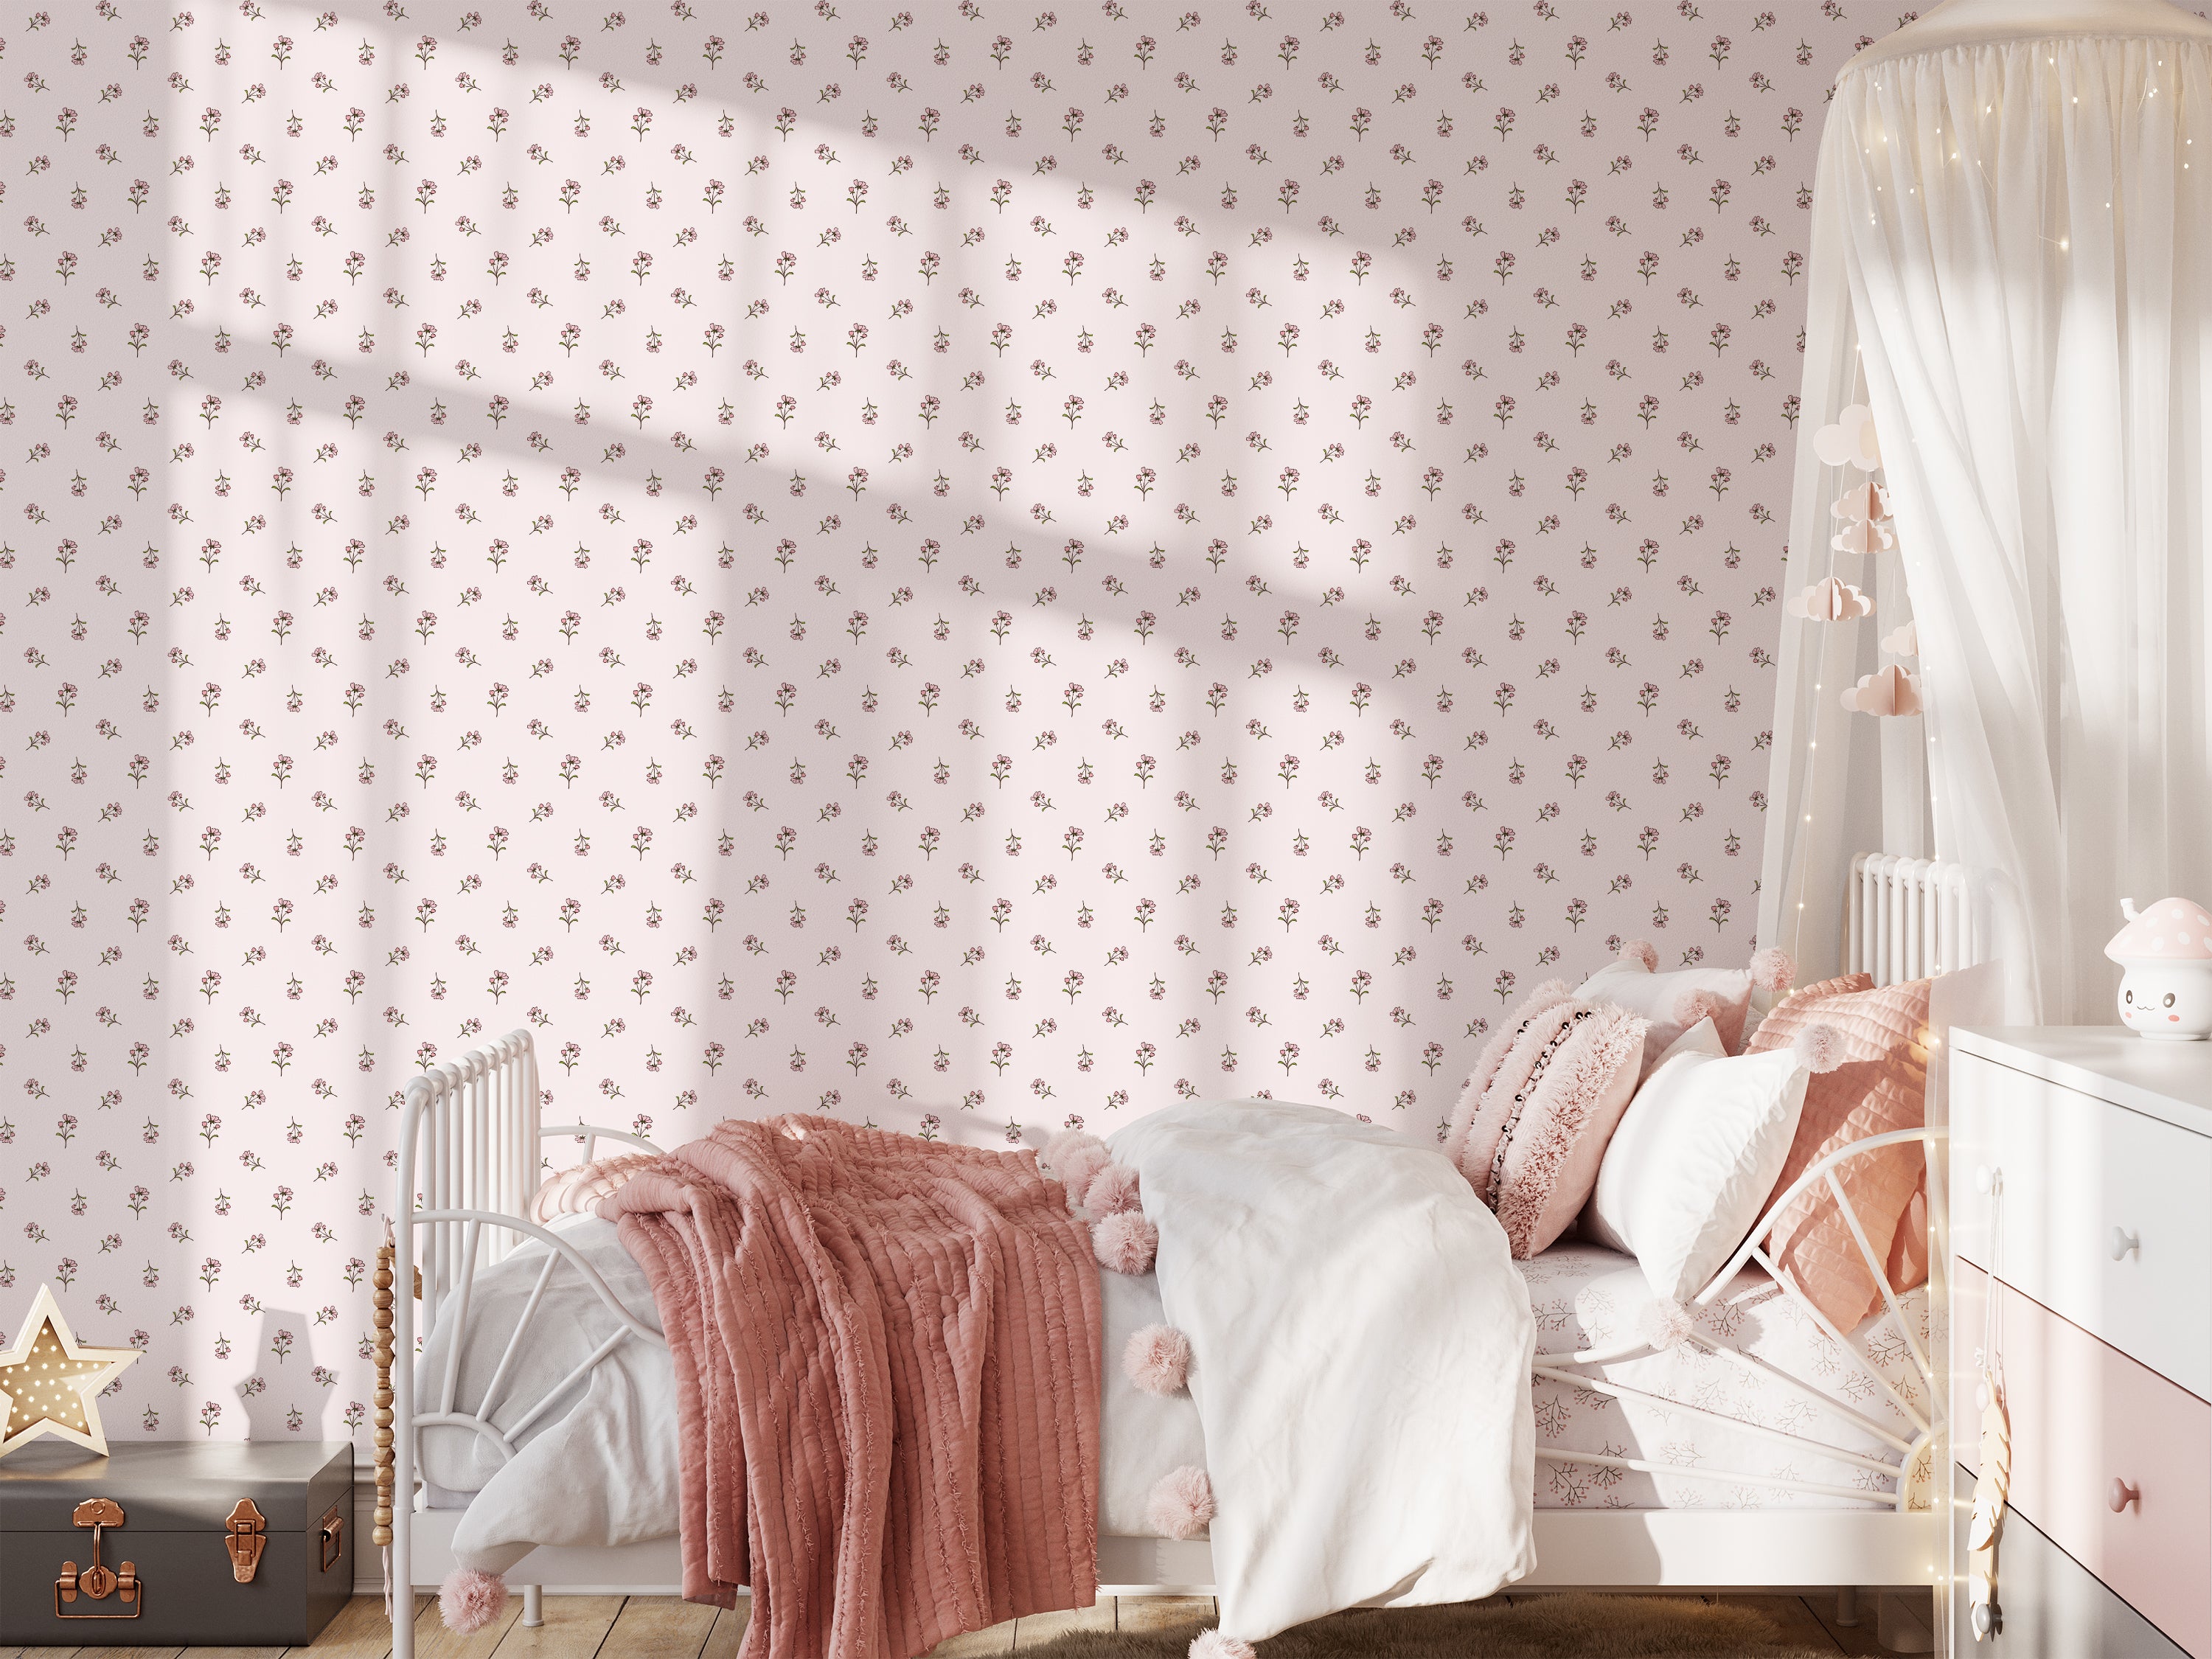 A cozy children's bedroom featuring the Daphne Floral Wallpaper with small, delicate pink floral patterns on a soft white background. The room is styled with a metal frame bed covered in pink blankets, matching pillows, and a white canopy, creating a dreamy and gentle atmosphere.